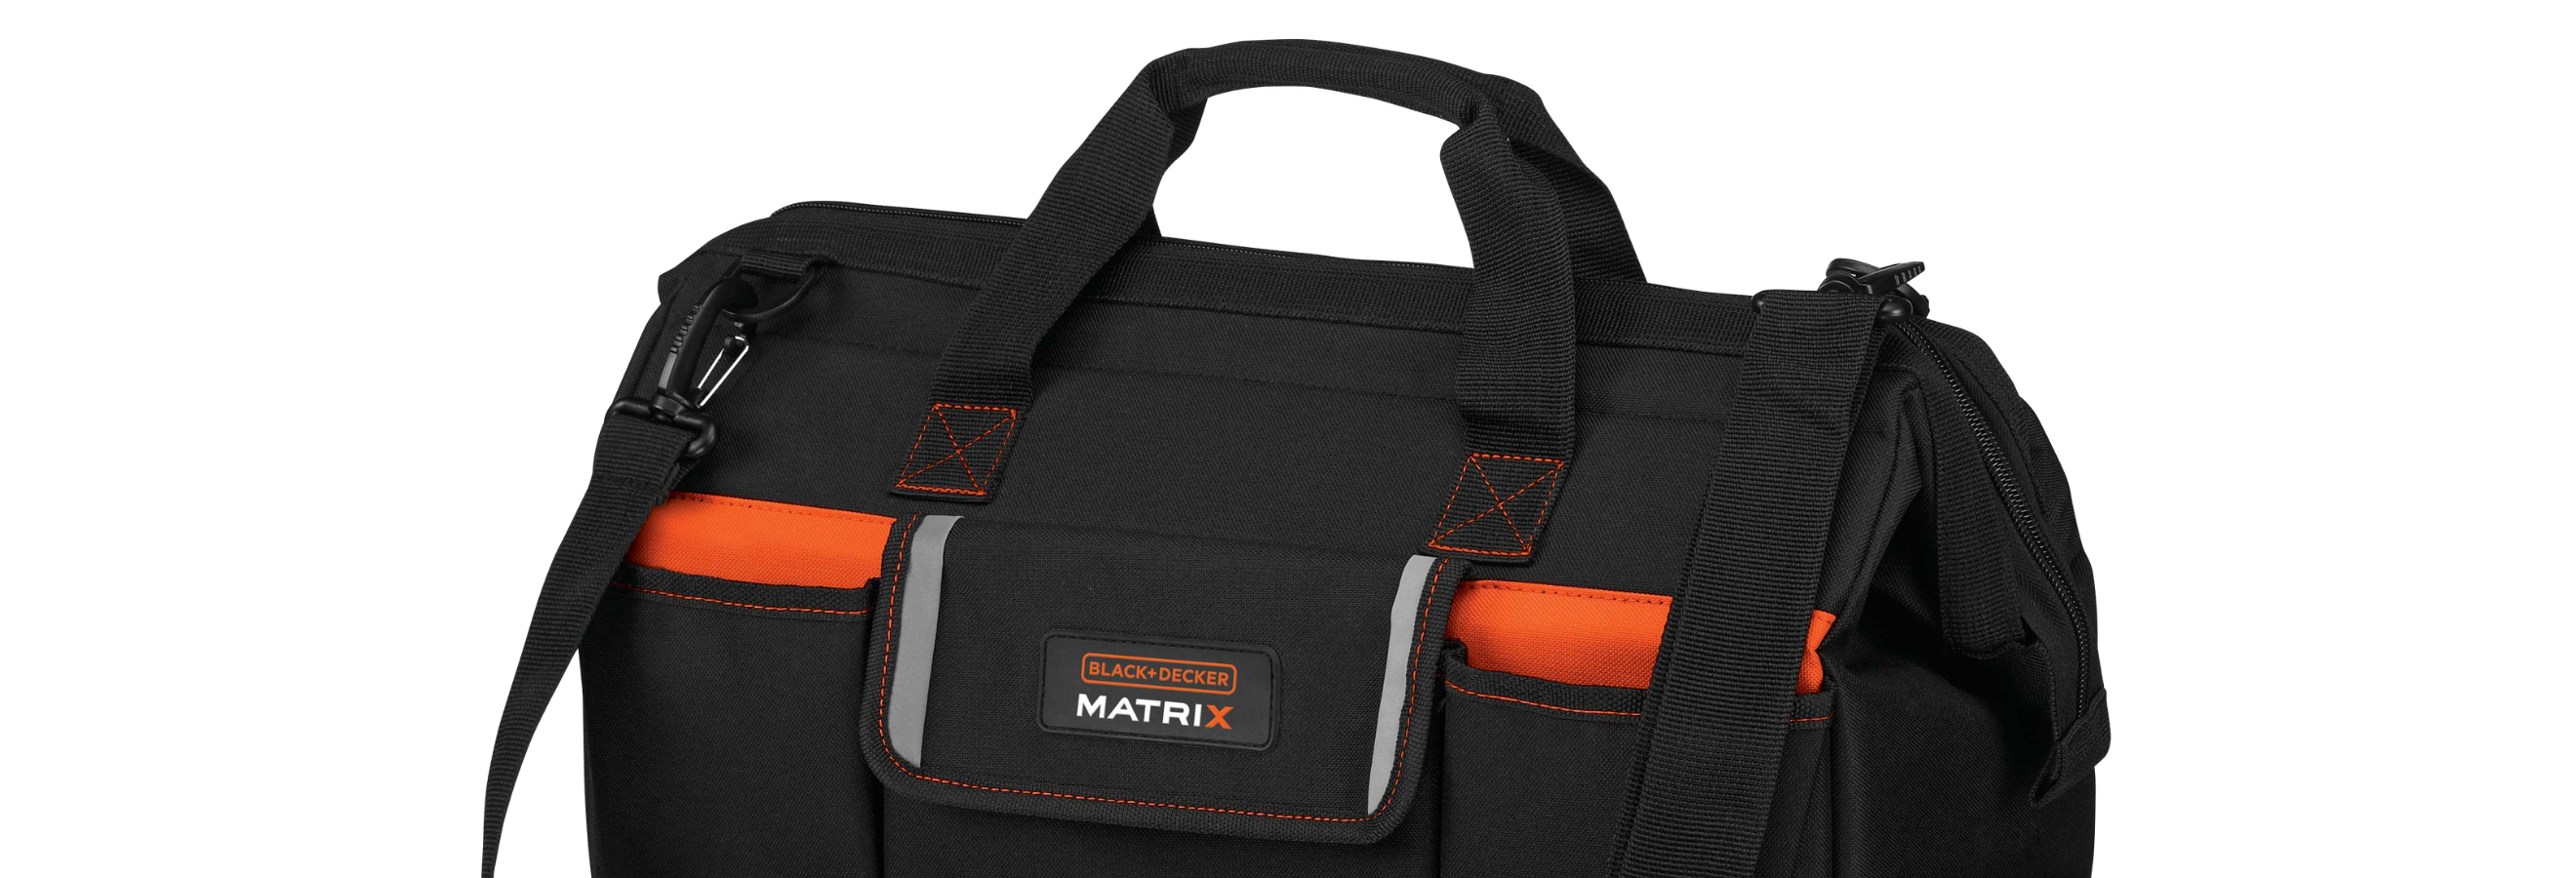 Tool Tote Bag For Matrix System, Wide-Mouth, 21-Inch BLACK+DECKER